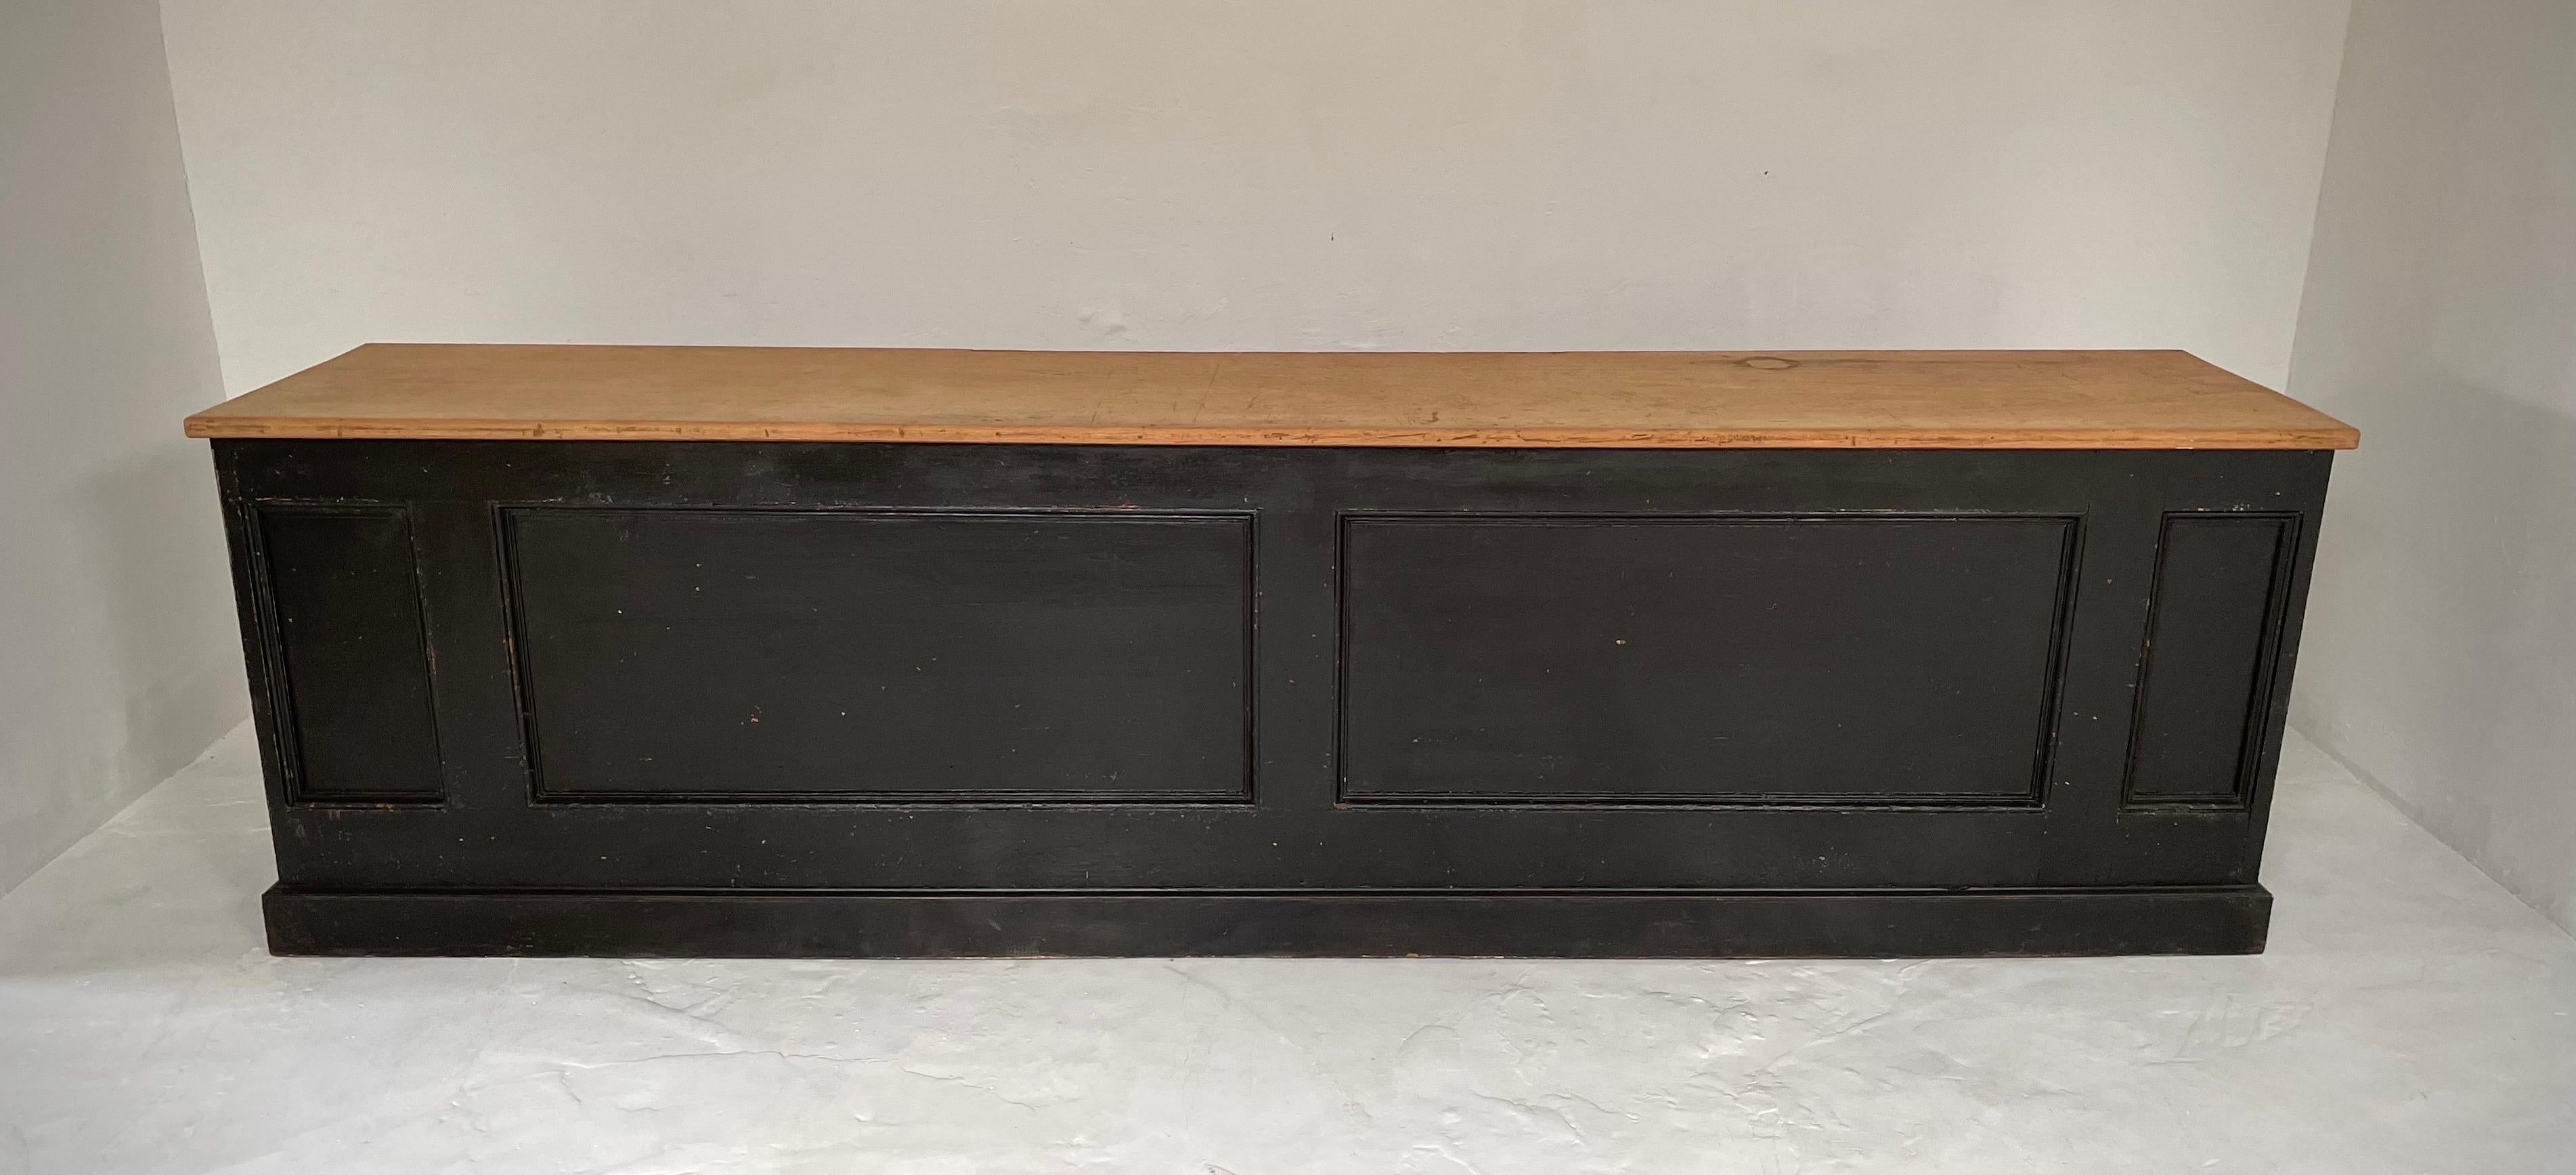 Incredible Victorian shop counter which originates from a haberdashery shop in the Spitalfields area of London, an area renowned for Jewish tailors . The front has two large and two smaller decorative panels; we believe it may have been cut down at